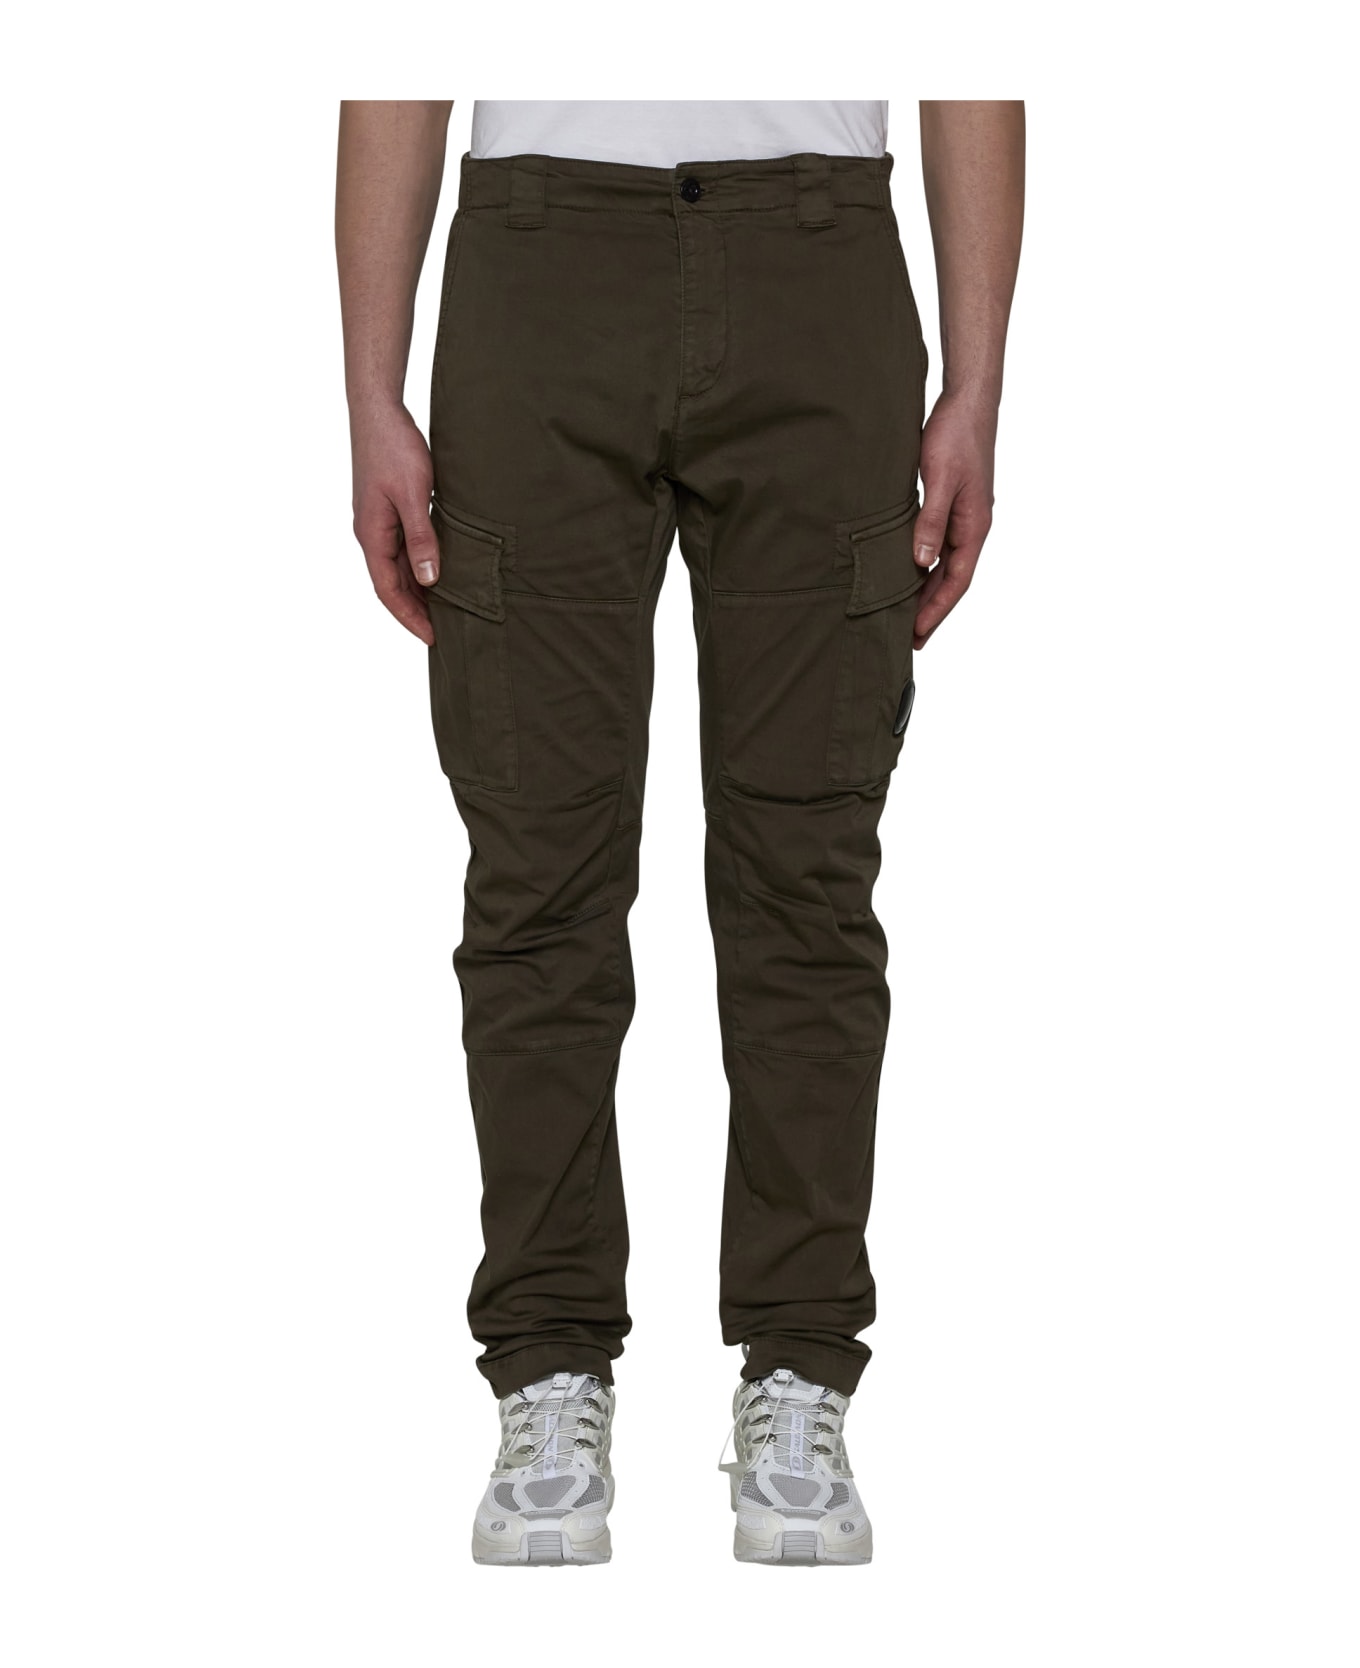 C.P. Company Stretch Cotton Cargo Pants - Ivy green ボトムス